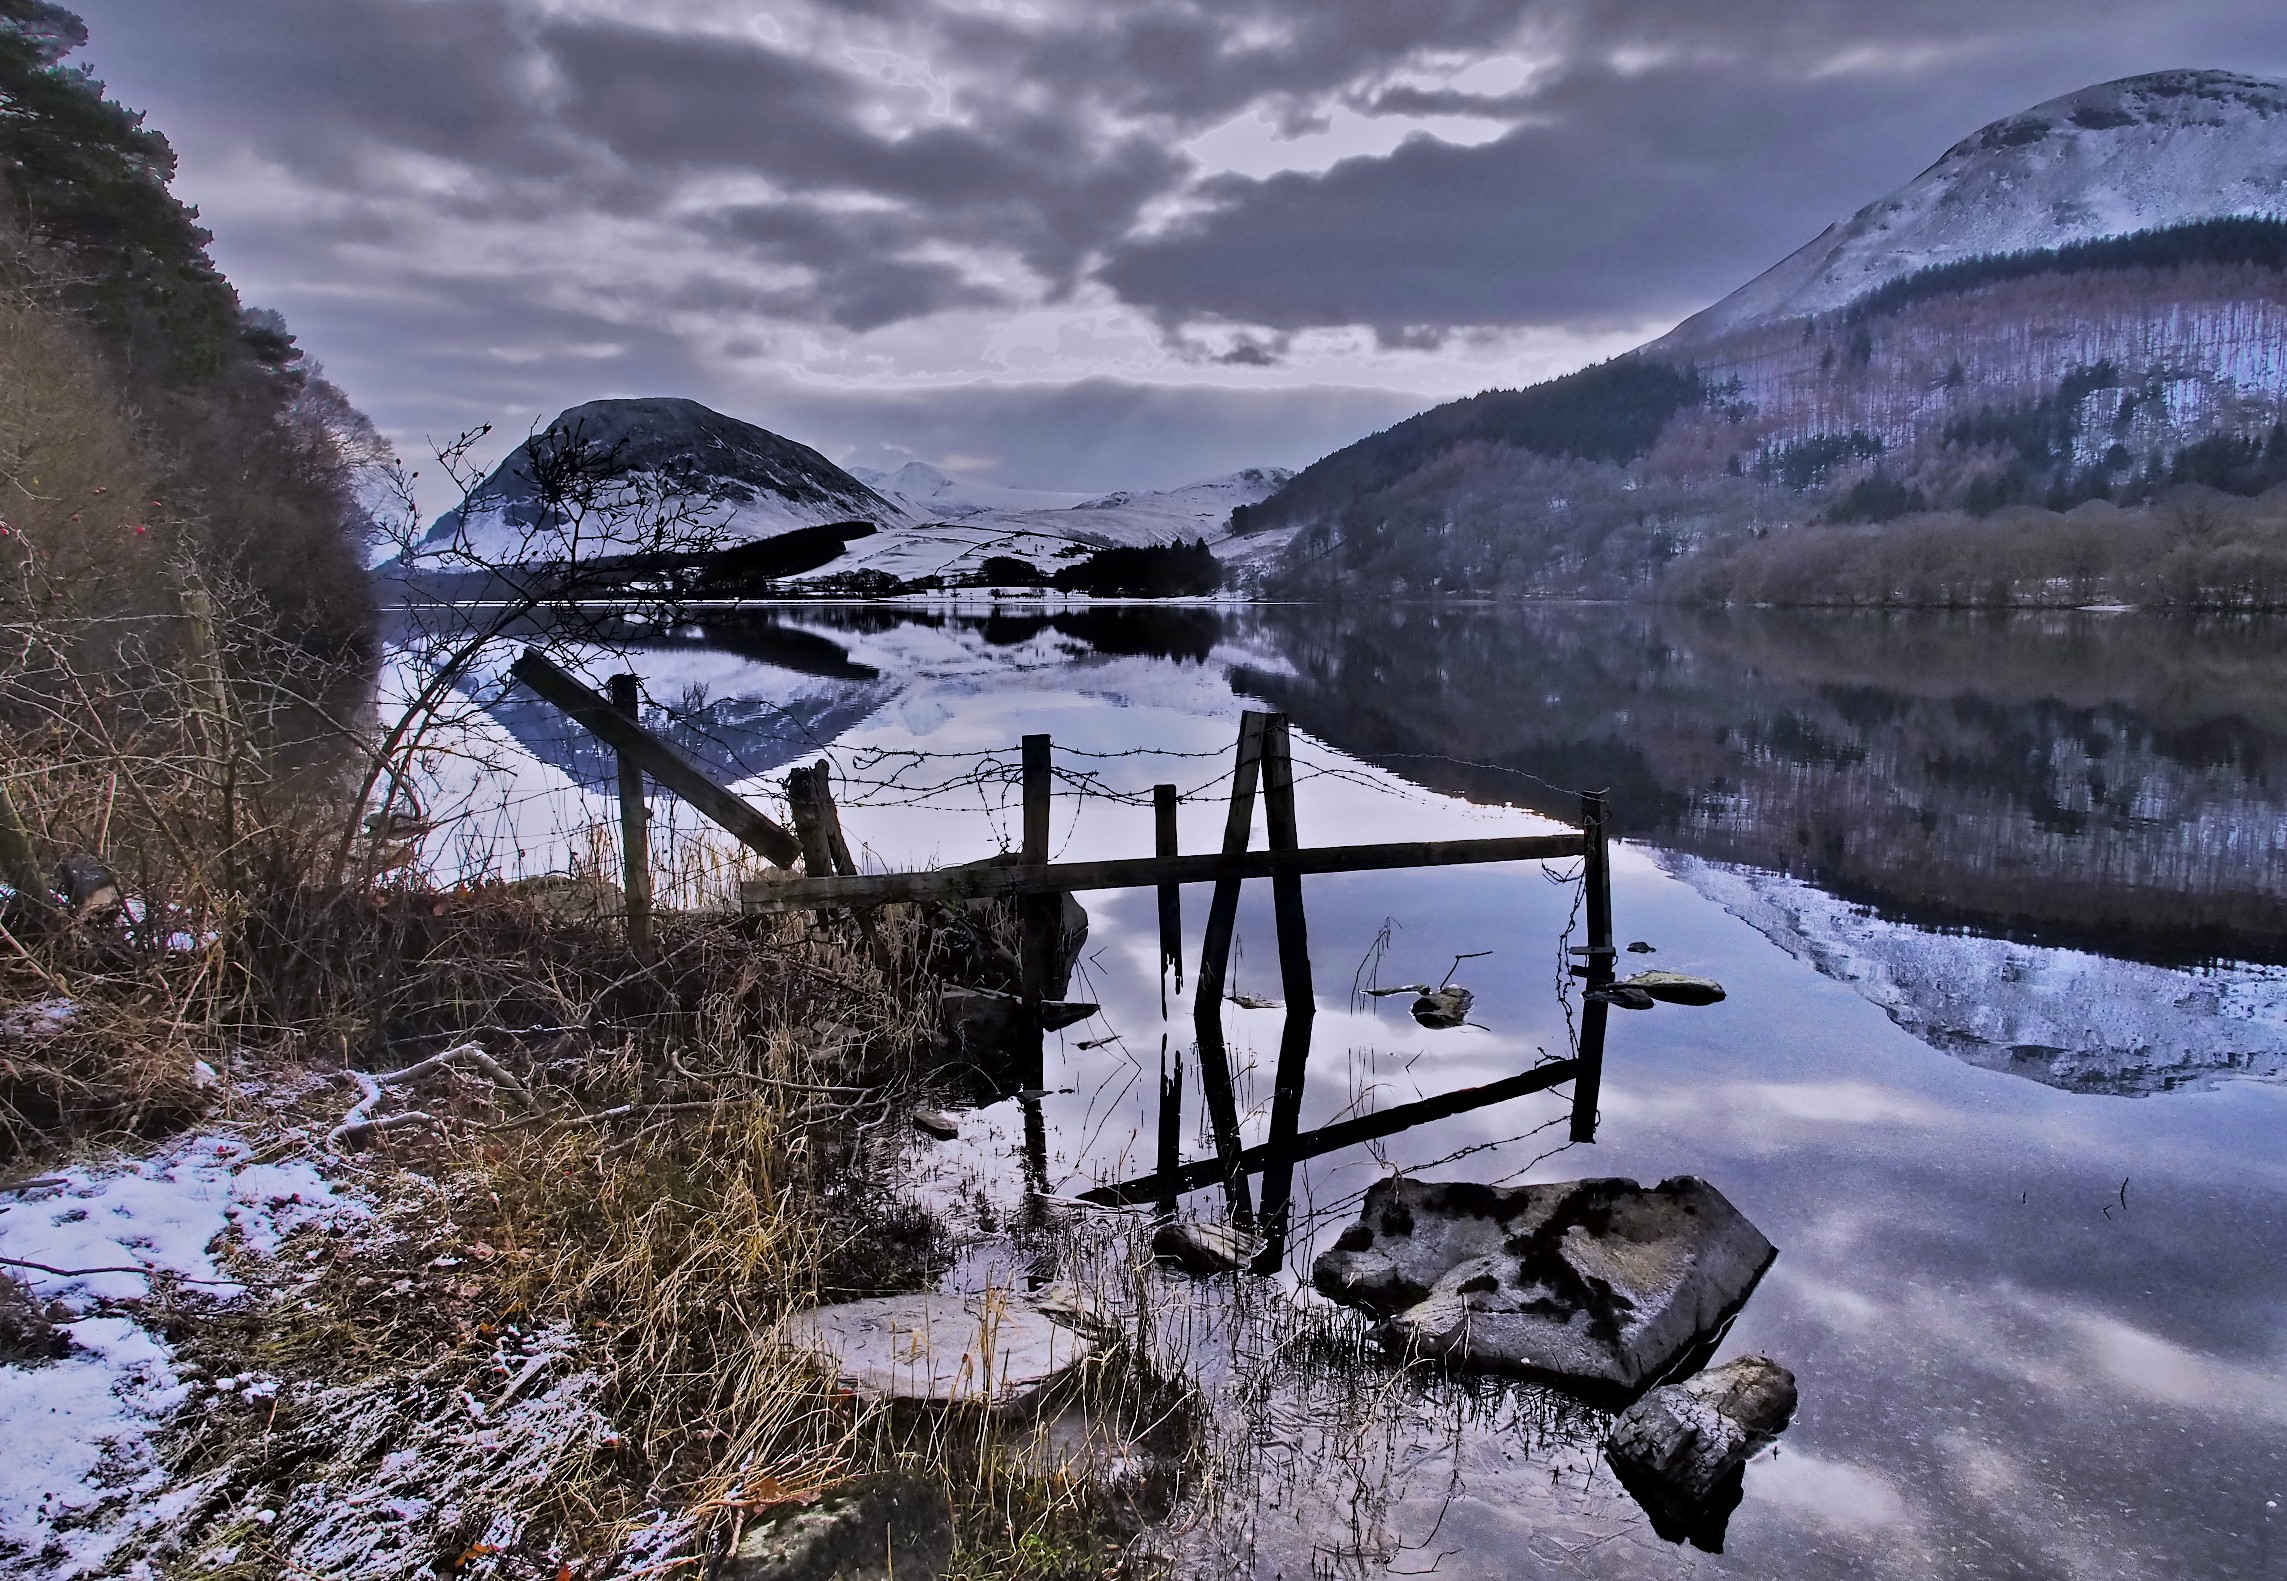    Loweswater &nbsp;     OM-D 12mm   